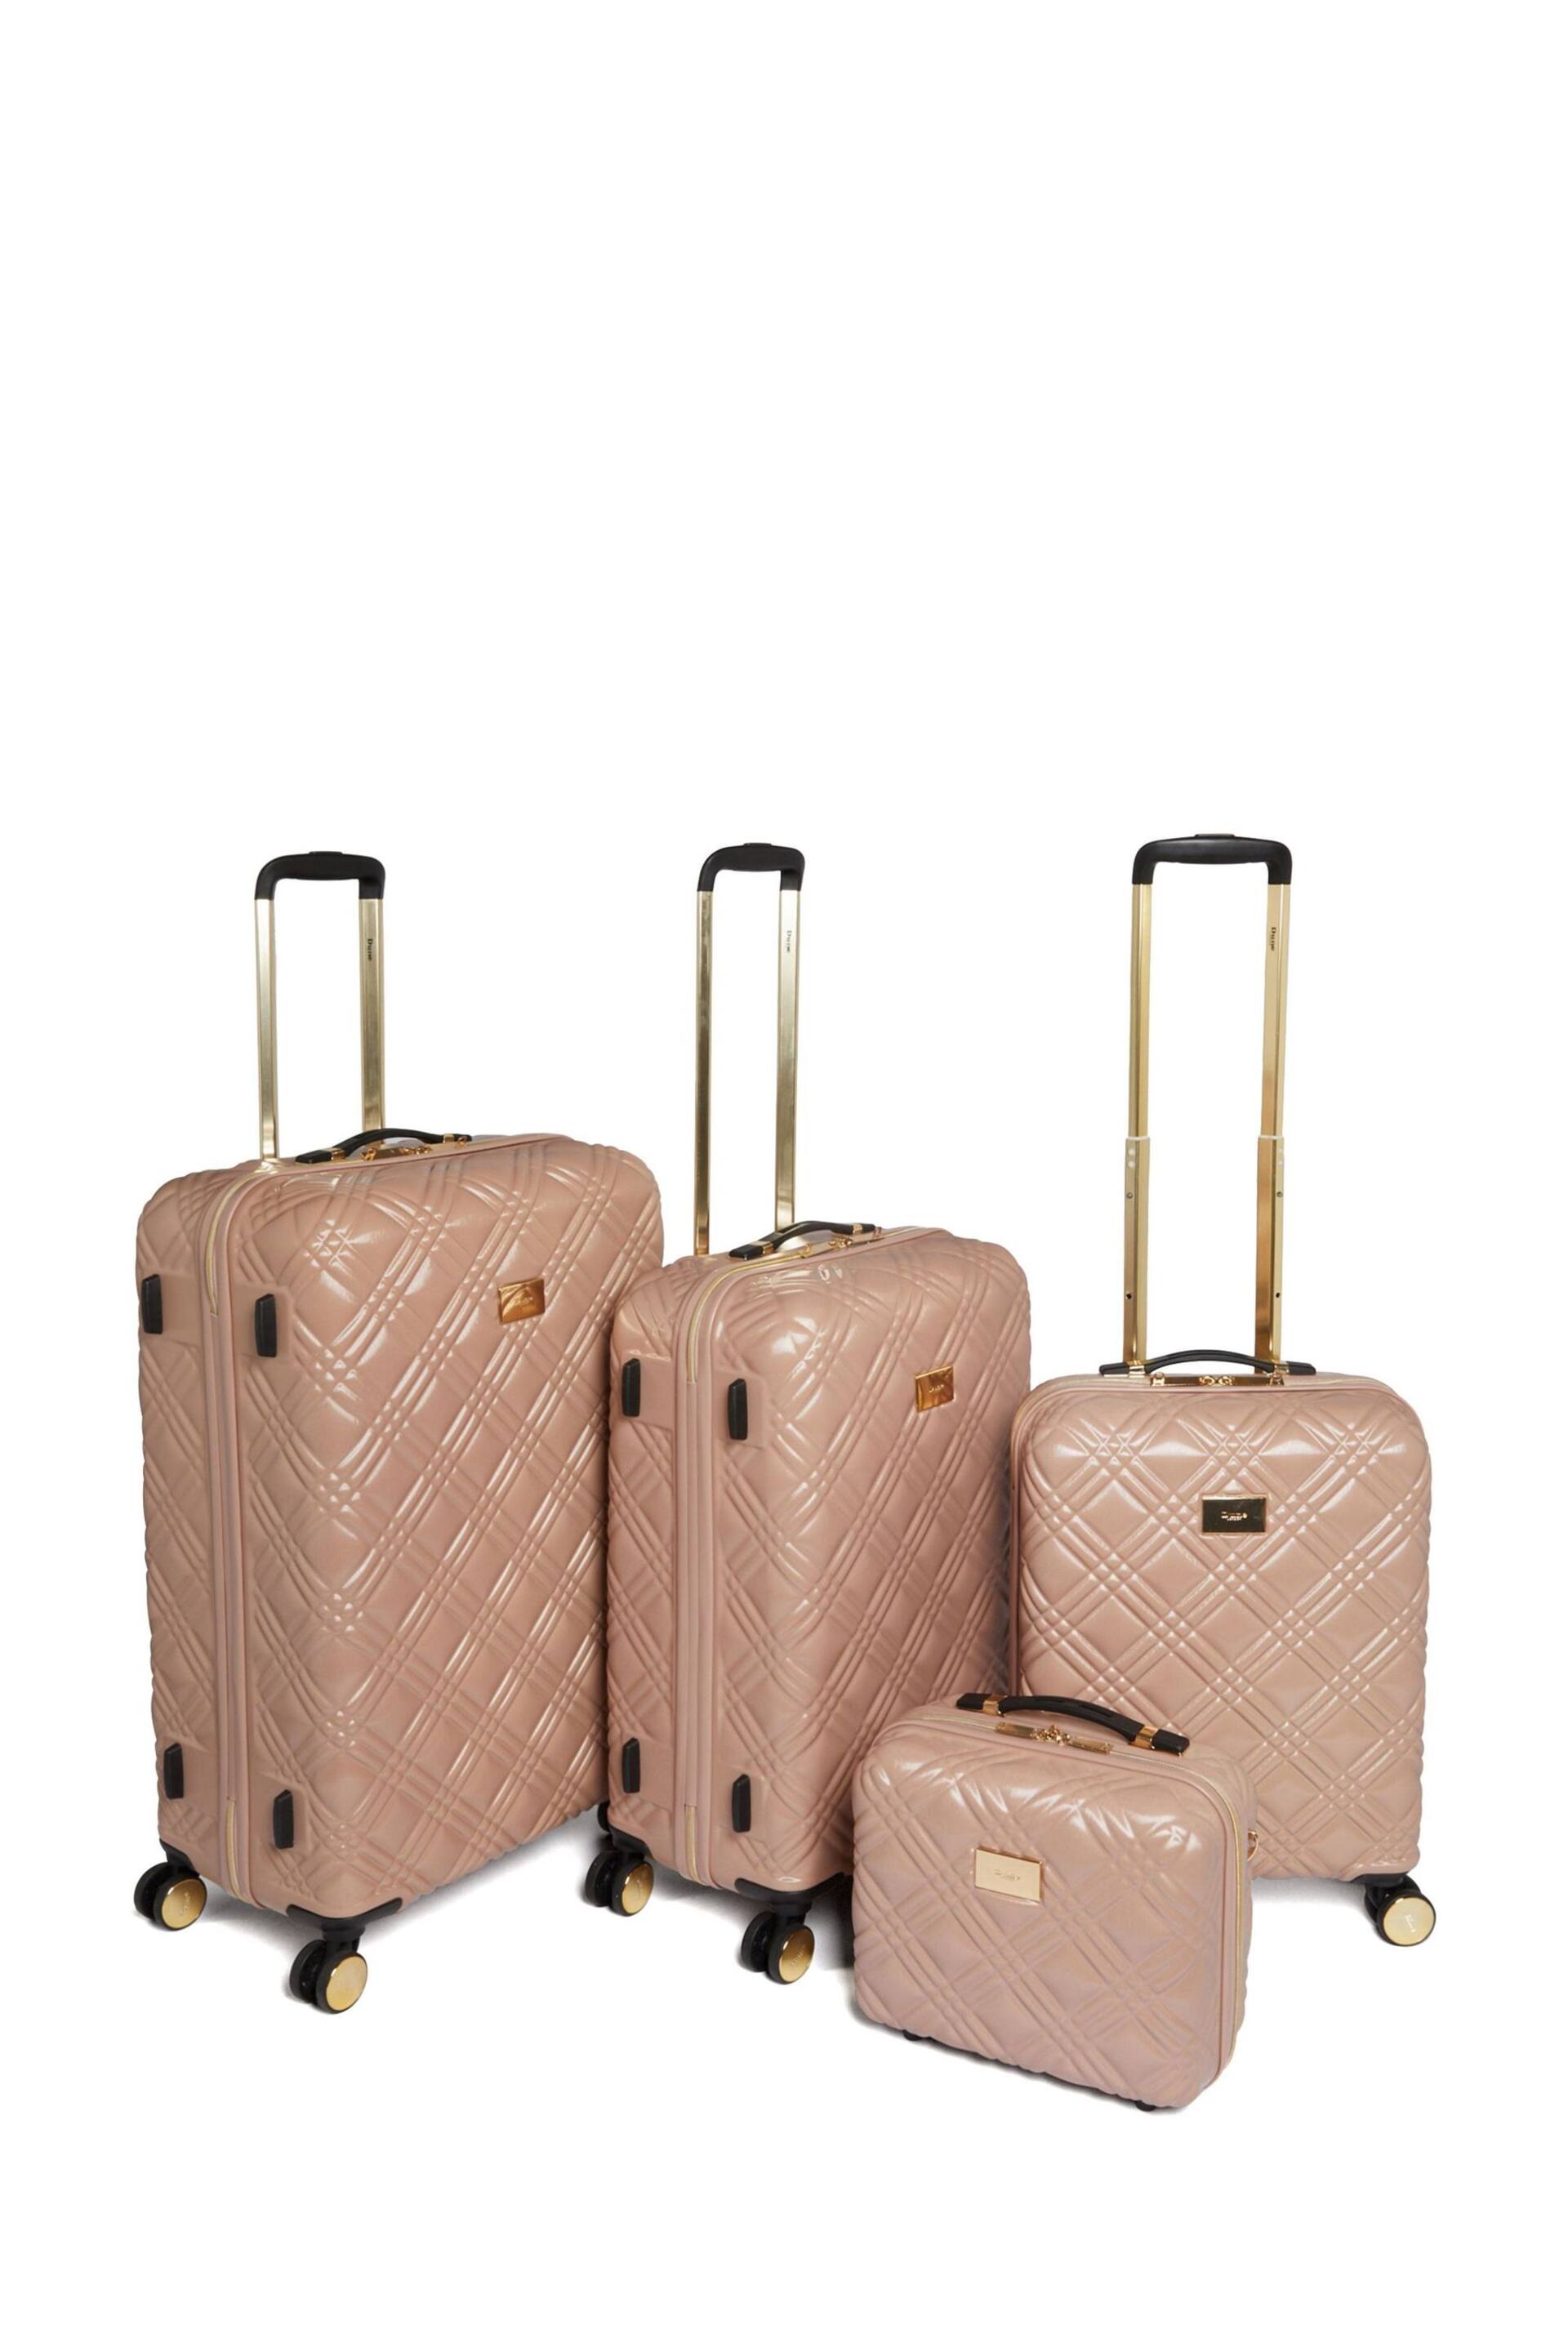 Dune London Pink Large Orchester 77cm Suitcase - Image 5 of 5